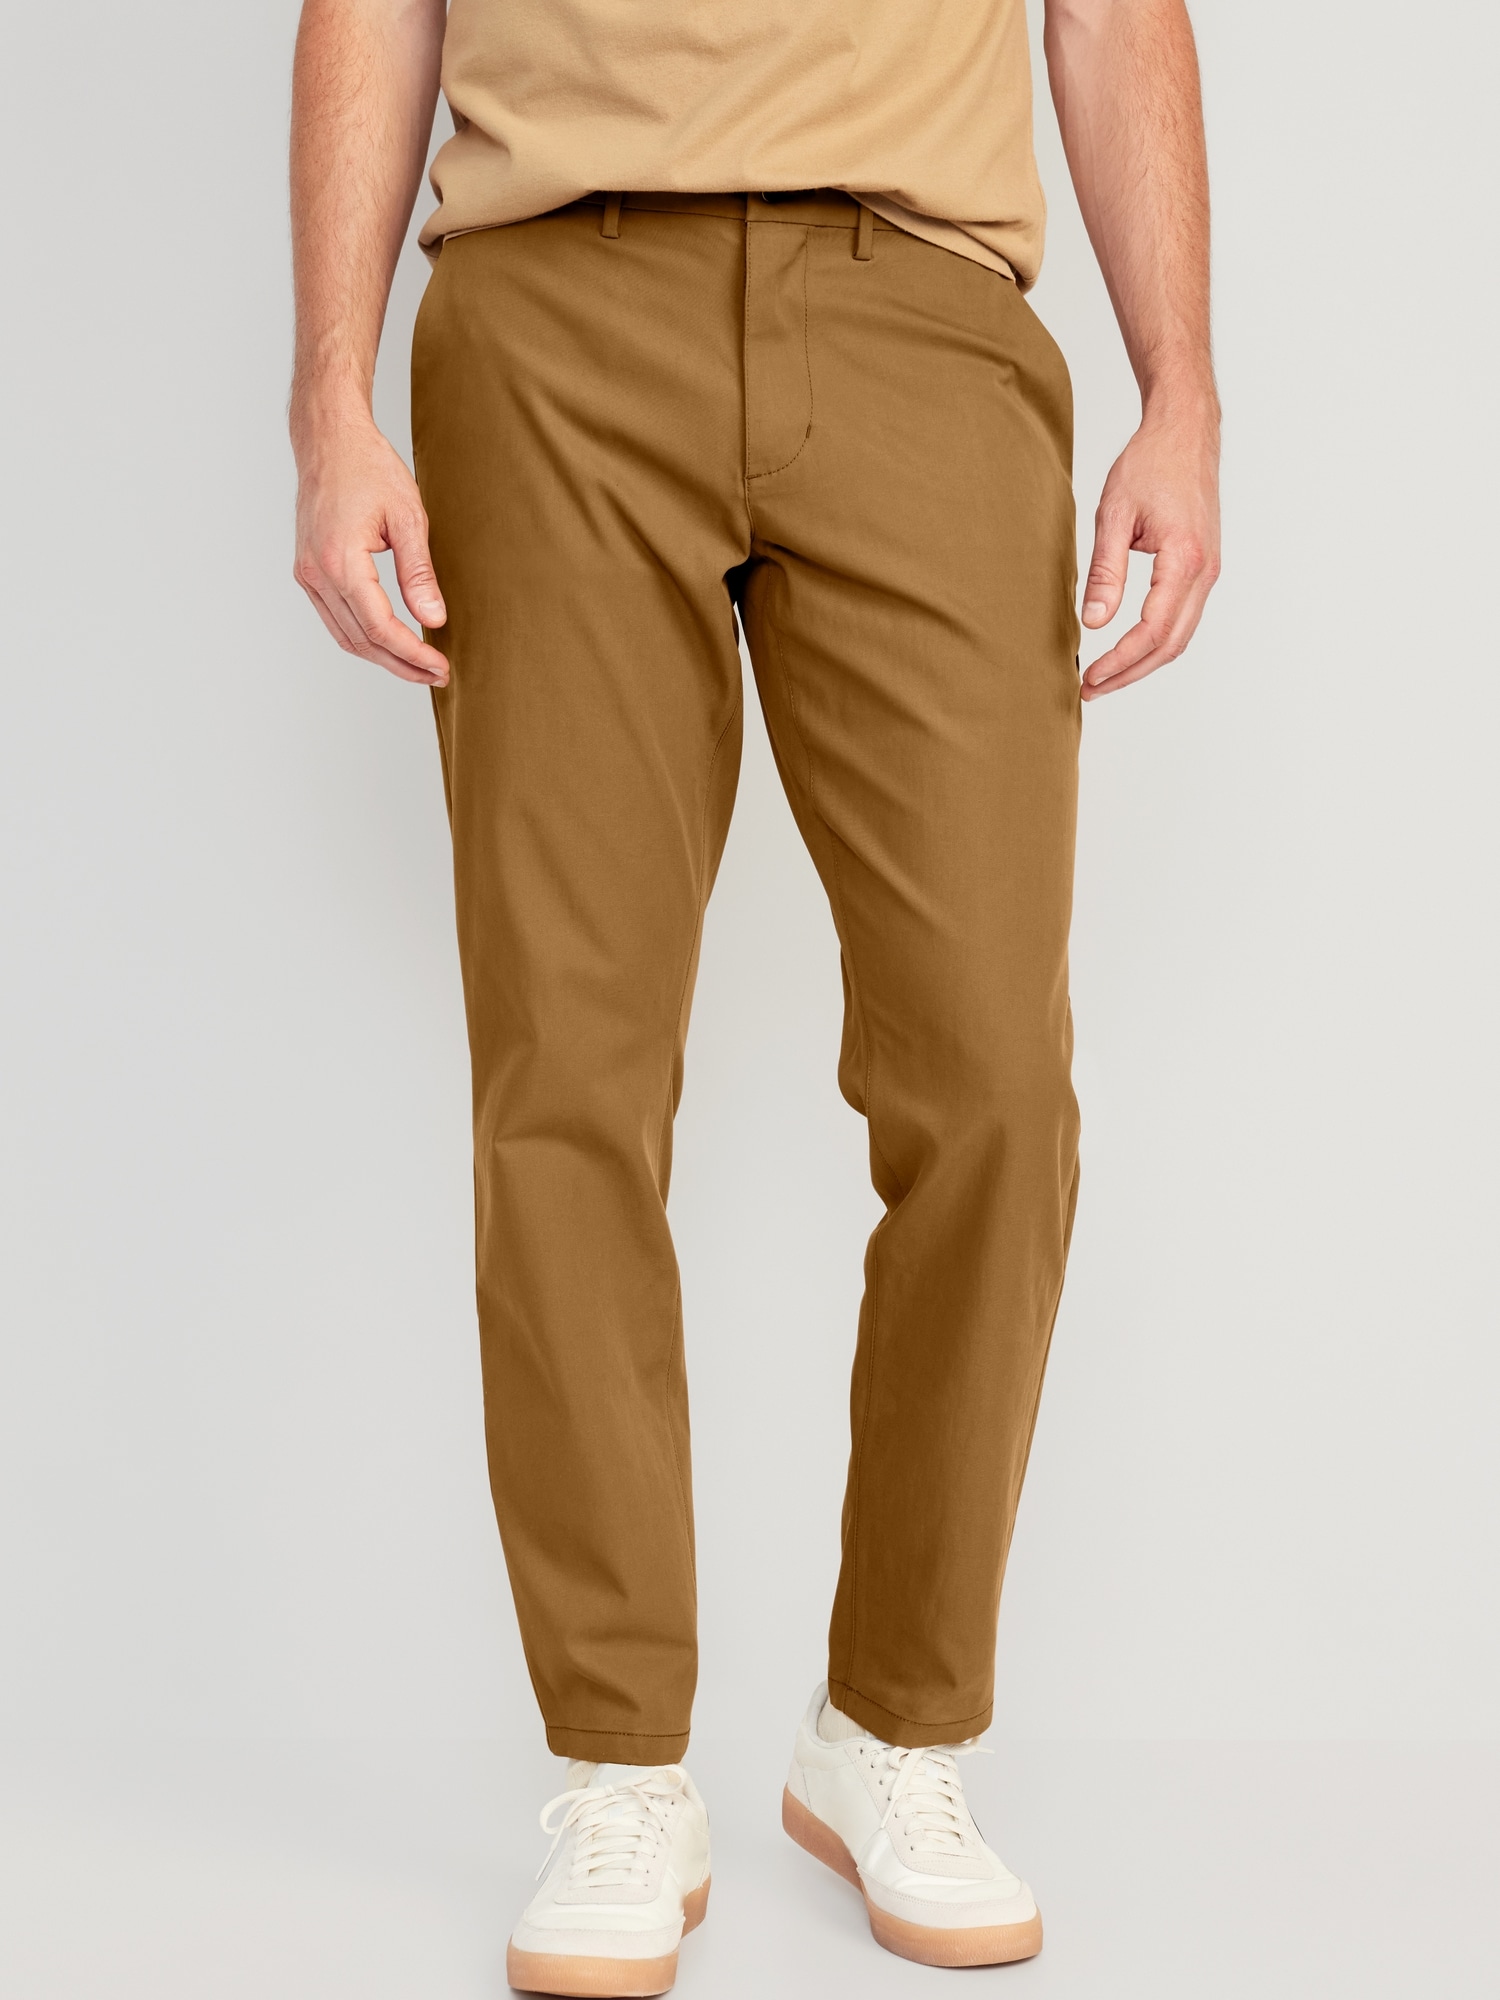 Buy AD by Arvind Men Olive Regular Fit Flat Front Casual Chinos - NNNOW.com